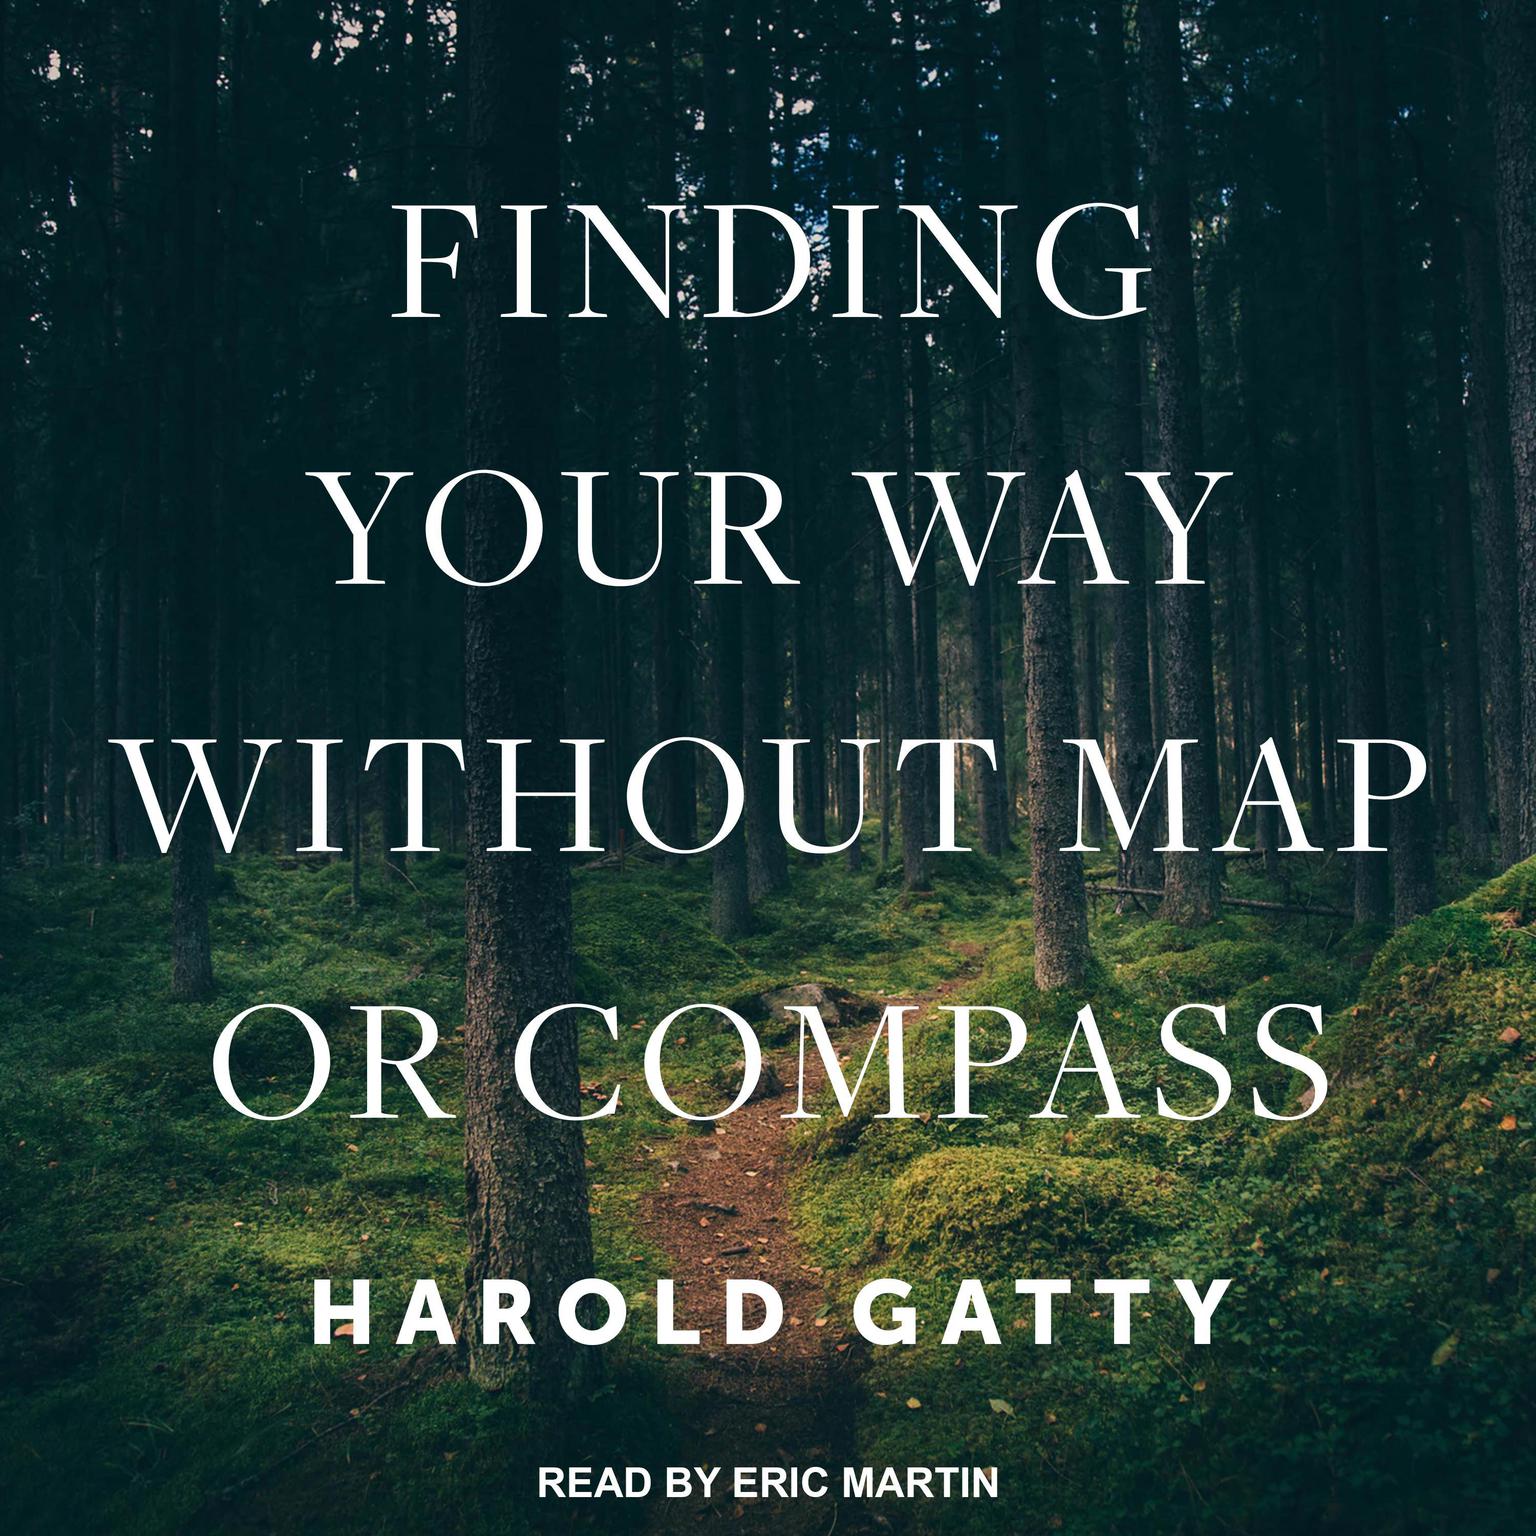 Finding Your Way Without Map or Compass Audiobook, by Harold Gatty